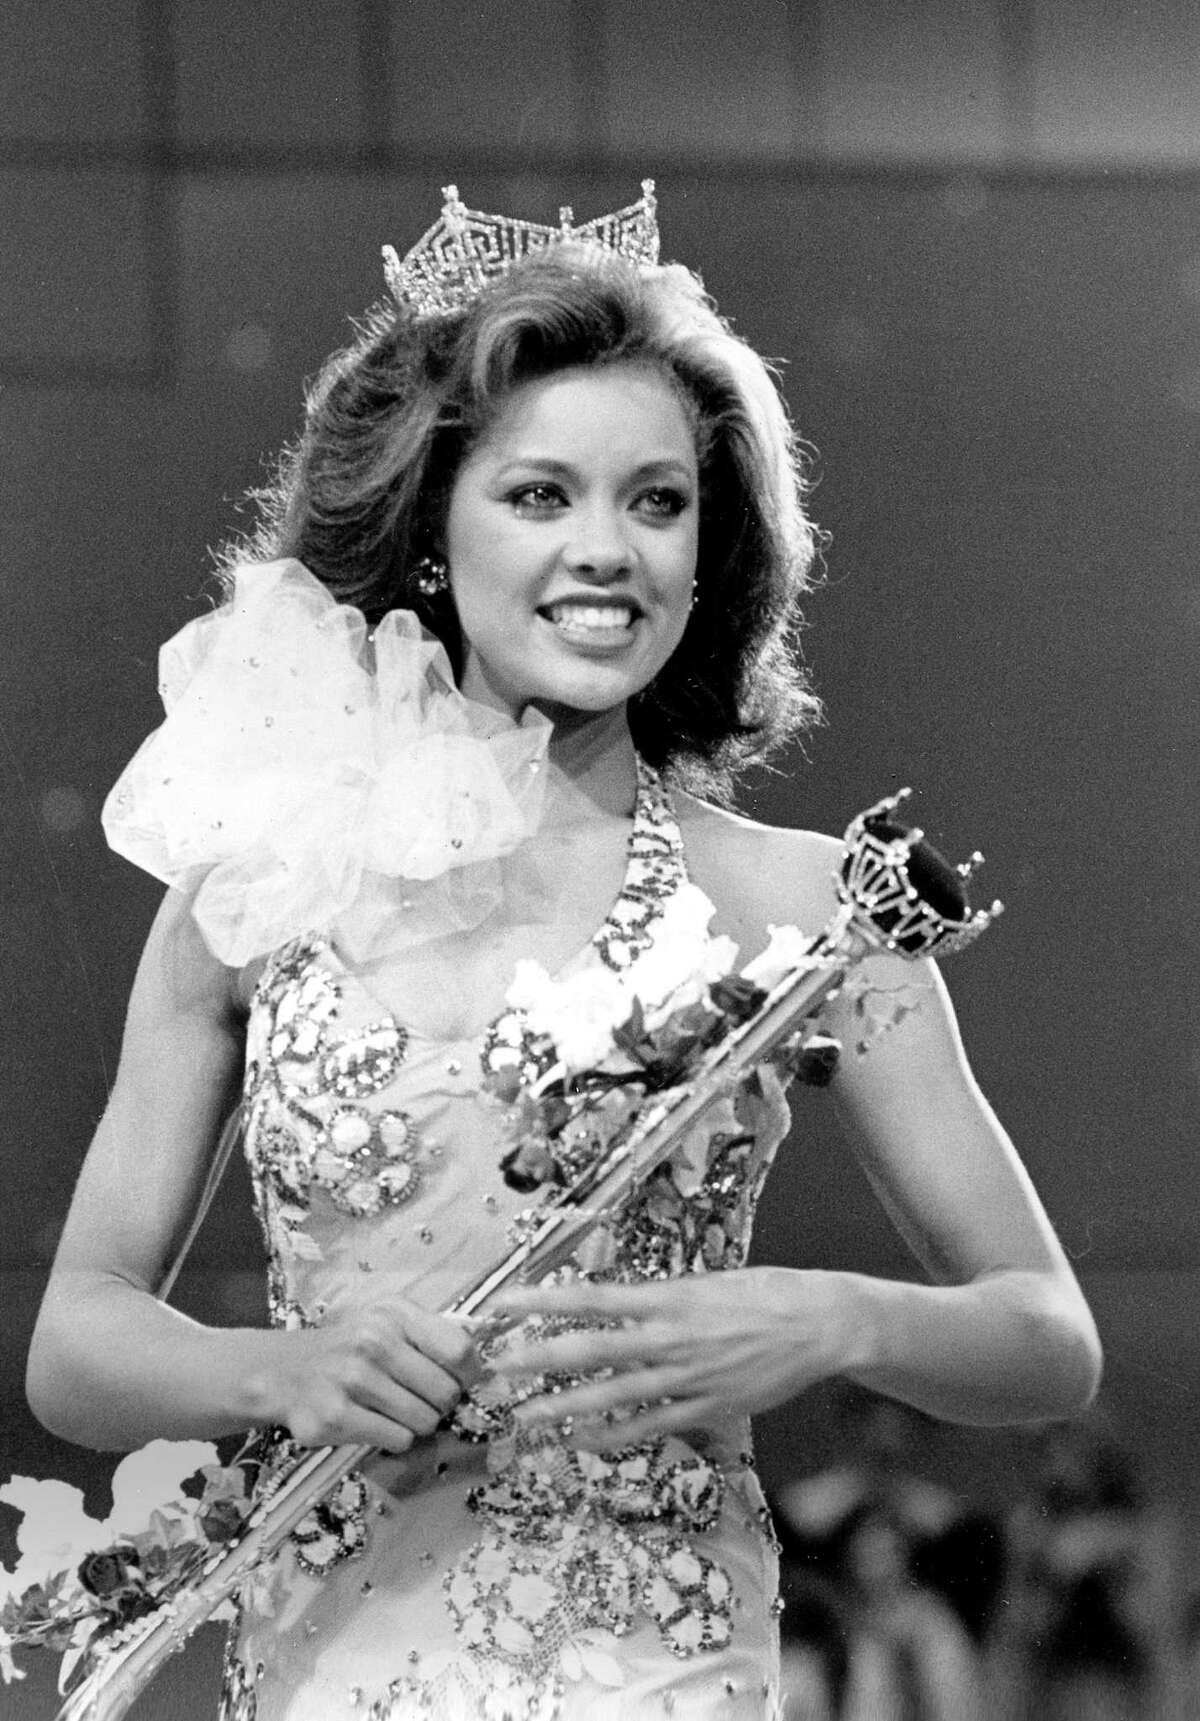 In this Sept. 17, 1983 photo, Miss New York Vanessa Williams appears during her coronation walk after she was crowned Miss America 1984 at the Miss America Pageant in Atlantic City, N.J.